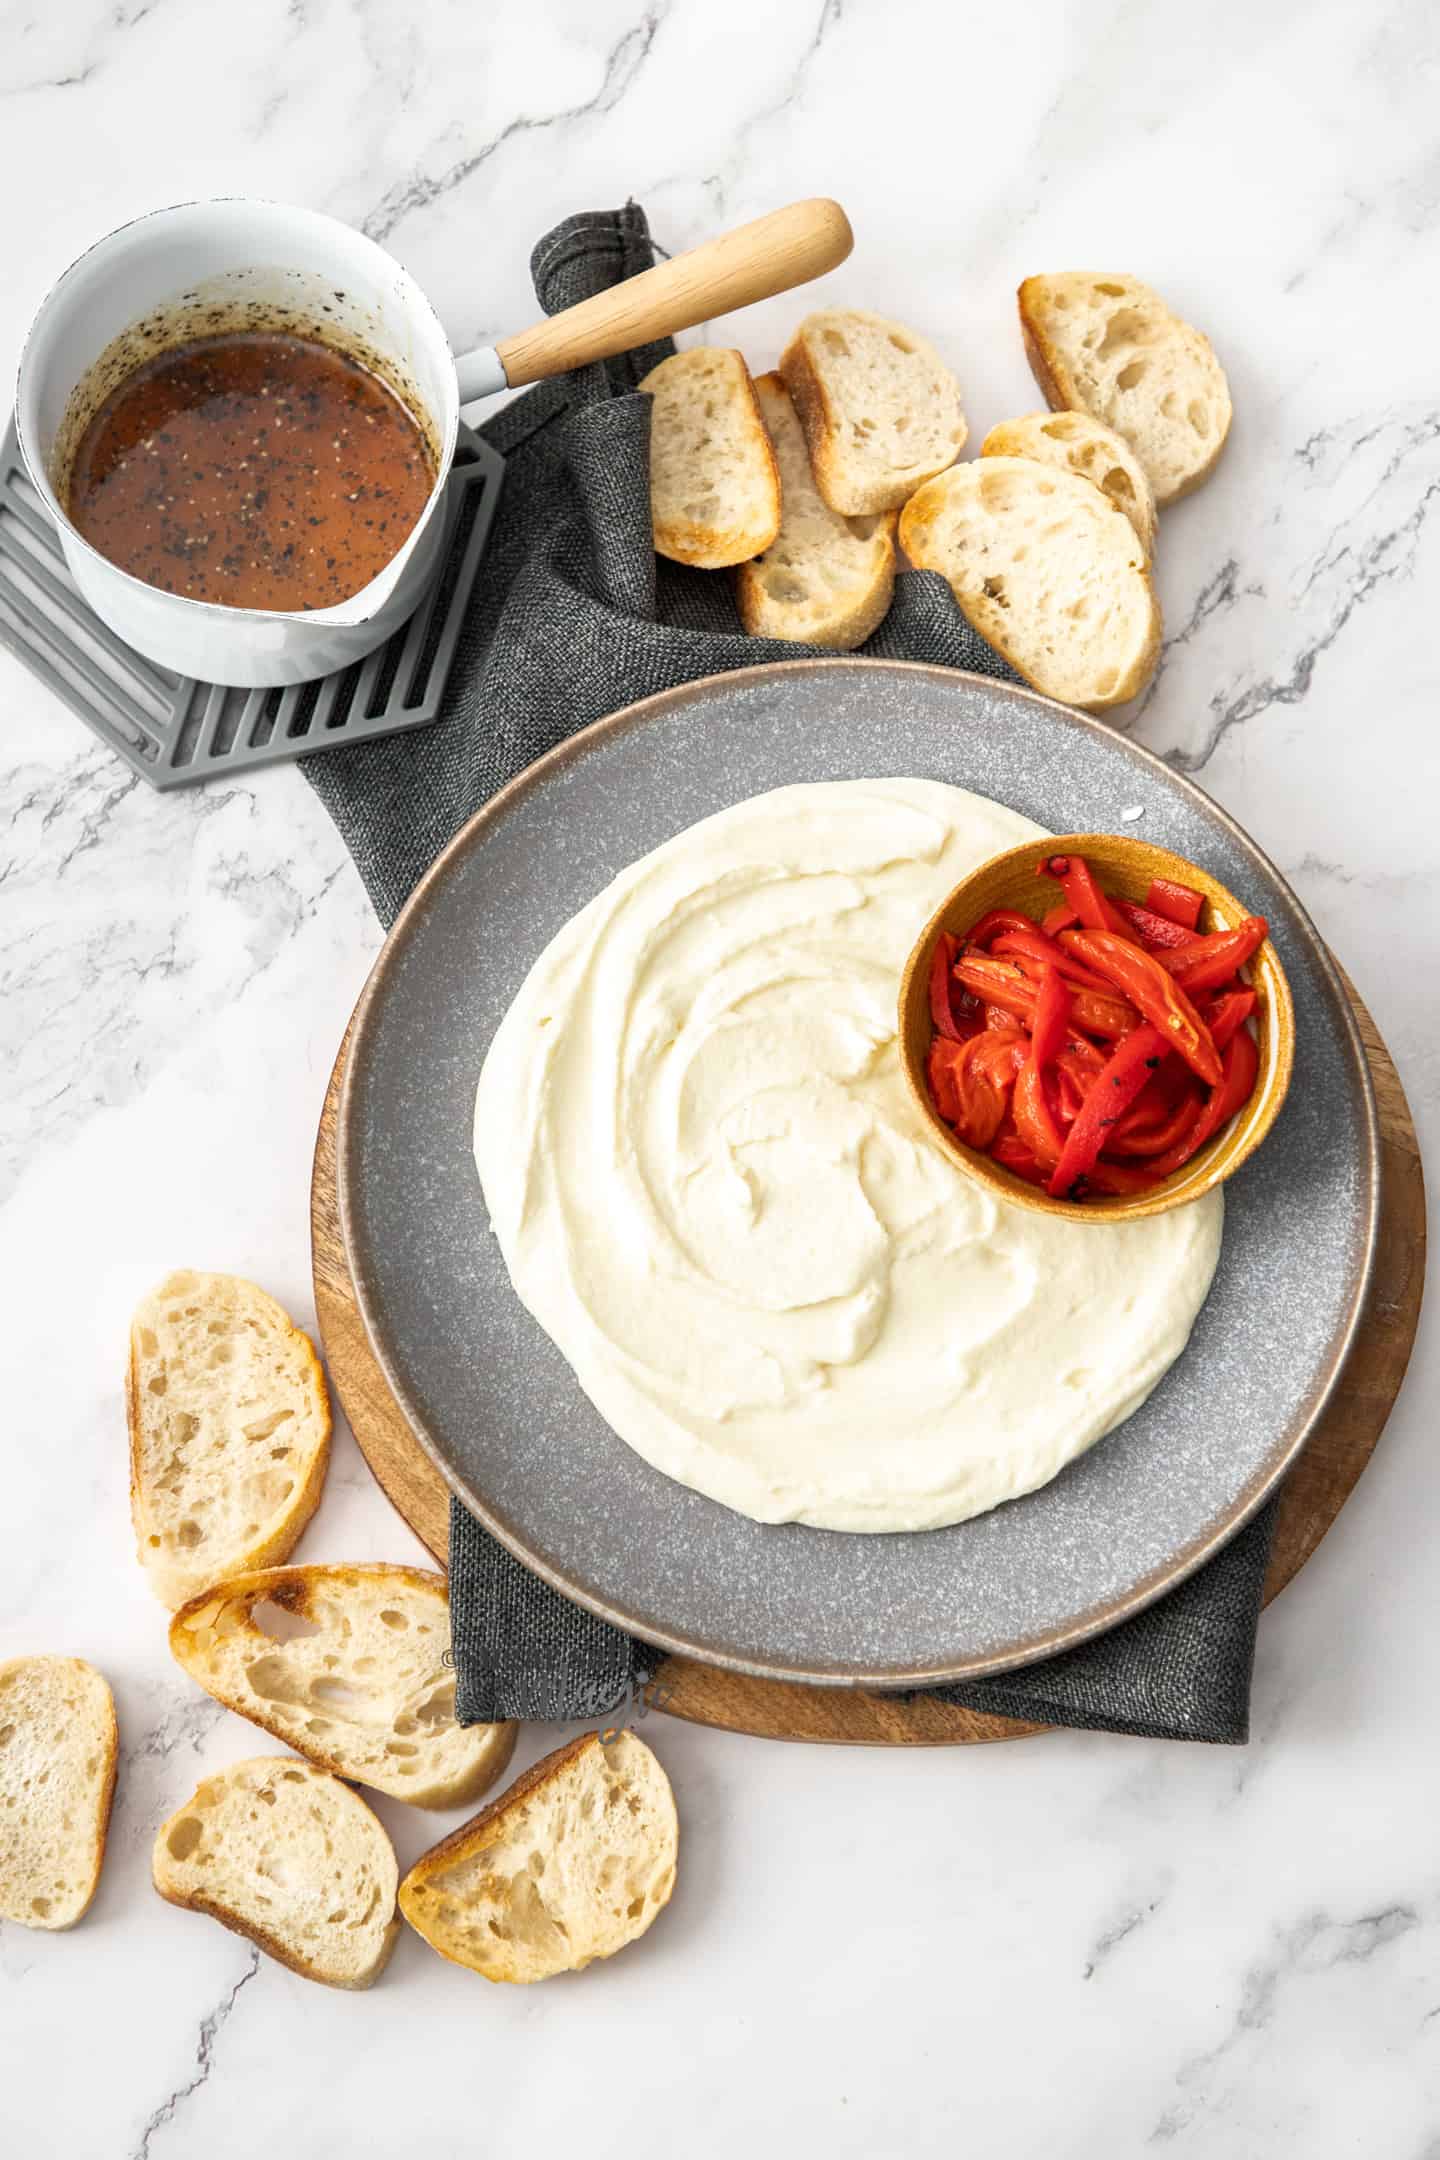 Goats cheese spread over a large grey plate with a small bowl of roasted peppers next to it.